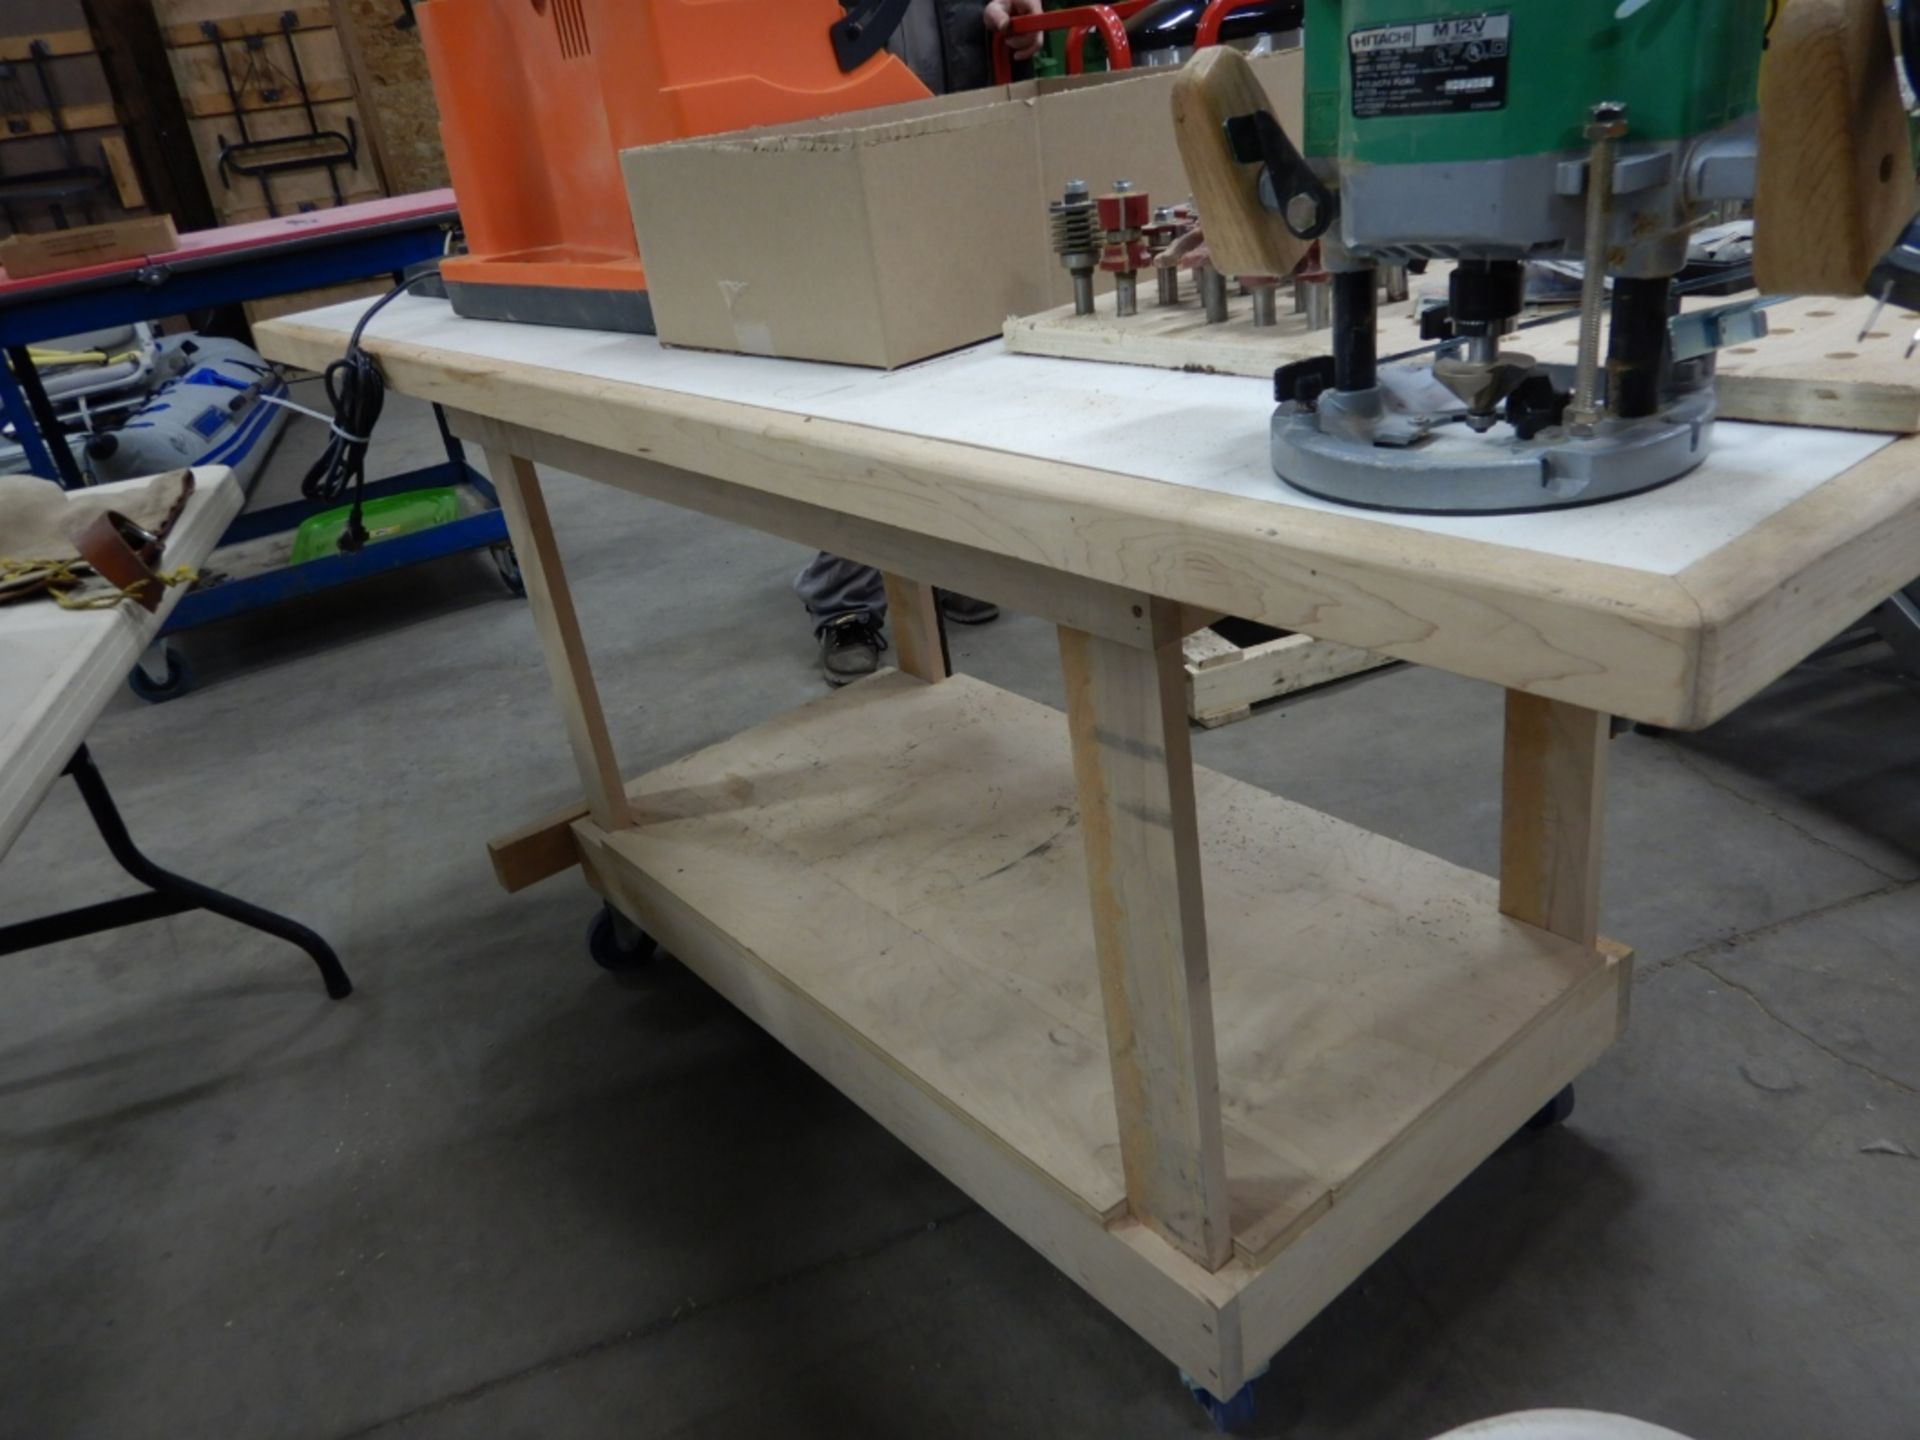 8FT WOOD WORKERS TABLE W/WOOD CLAMPING VISE, CASTORS - Image 2 of 2